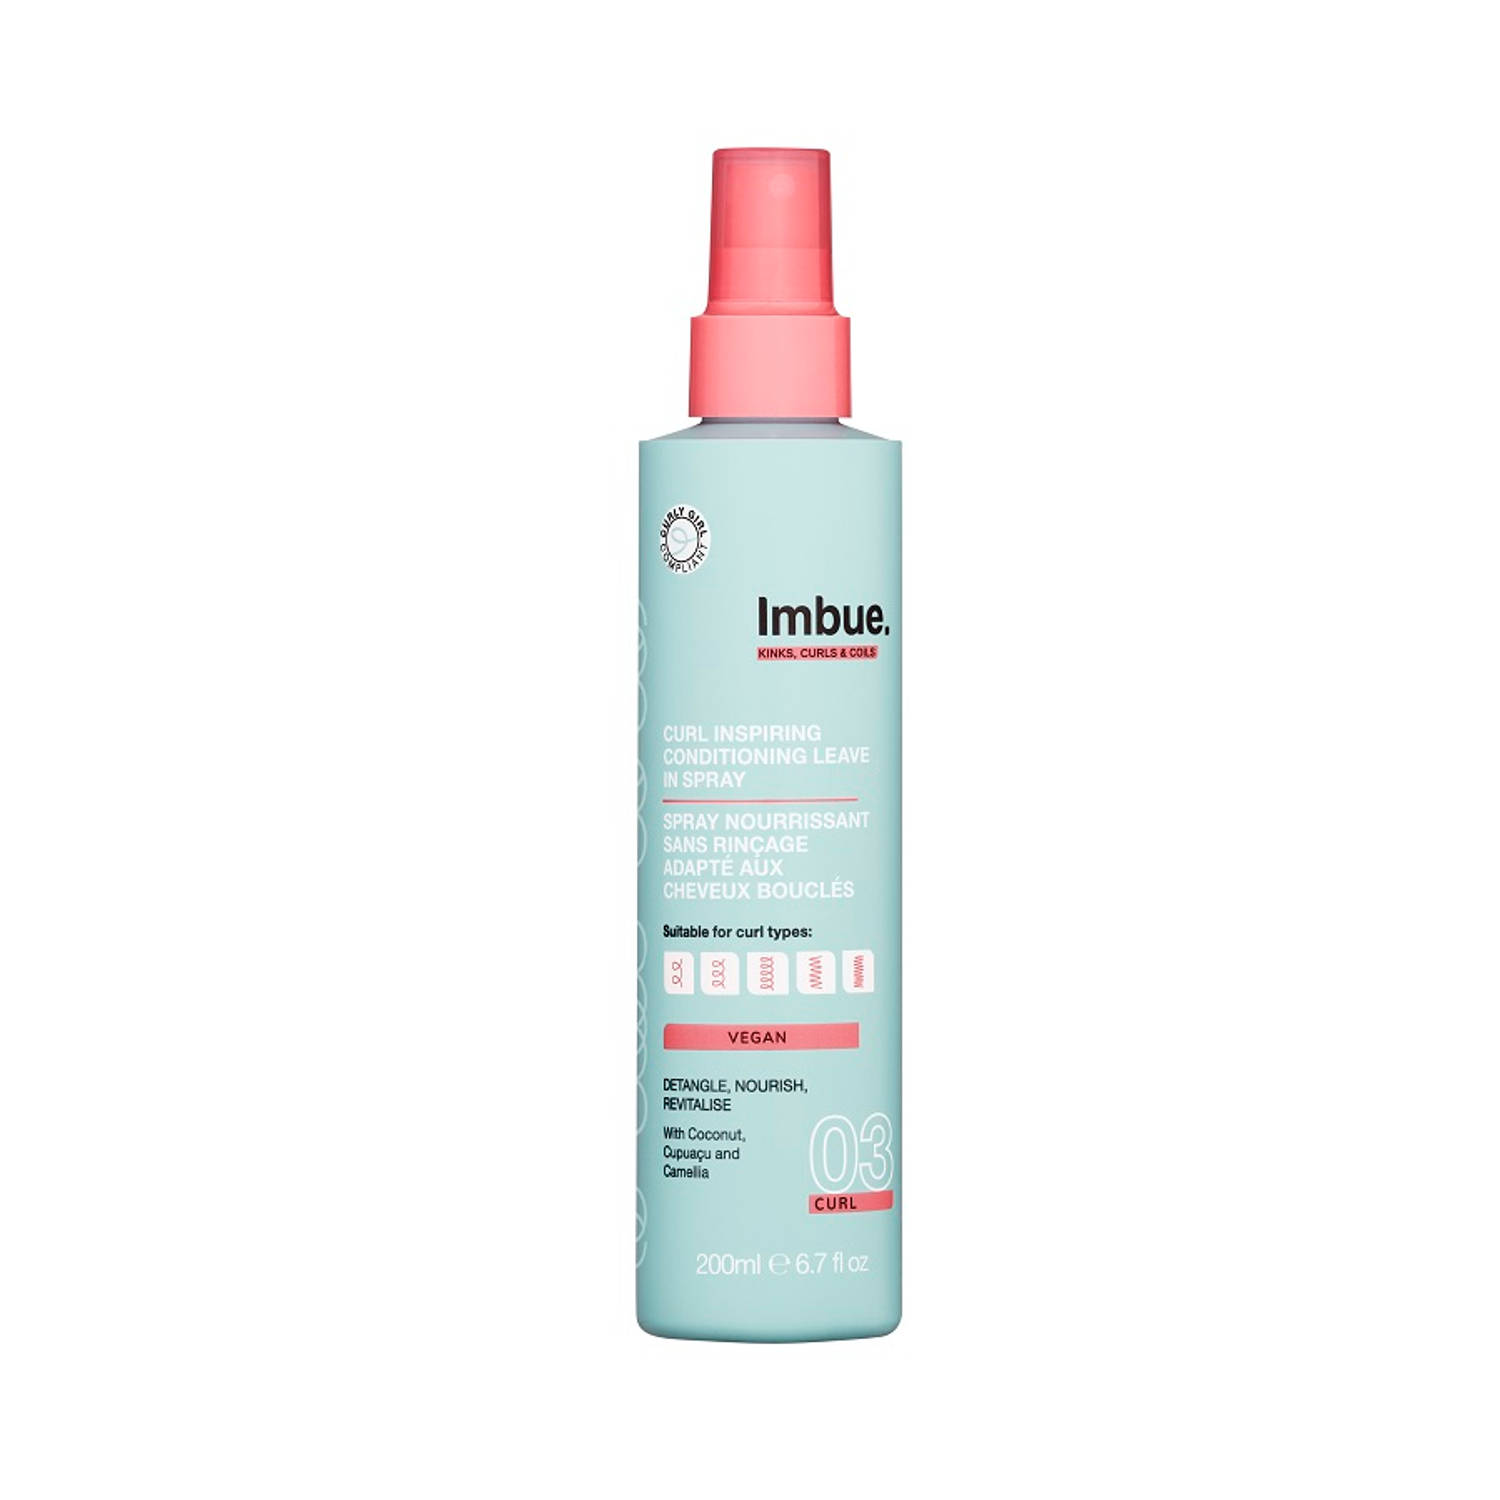 Imbue. Curl - Inspiring Conditioning Leave In Spray - 200 Ml